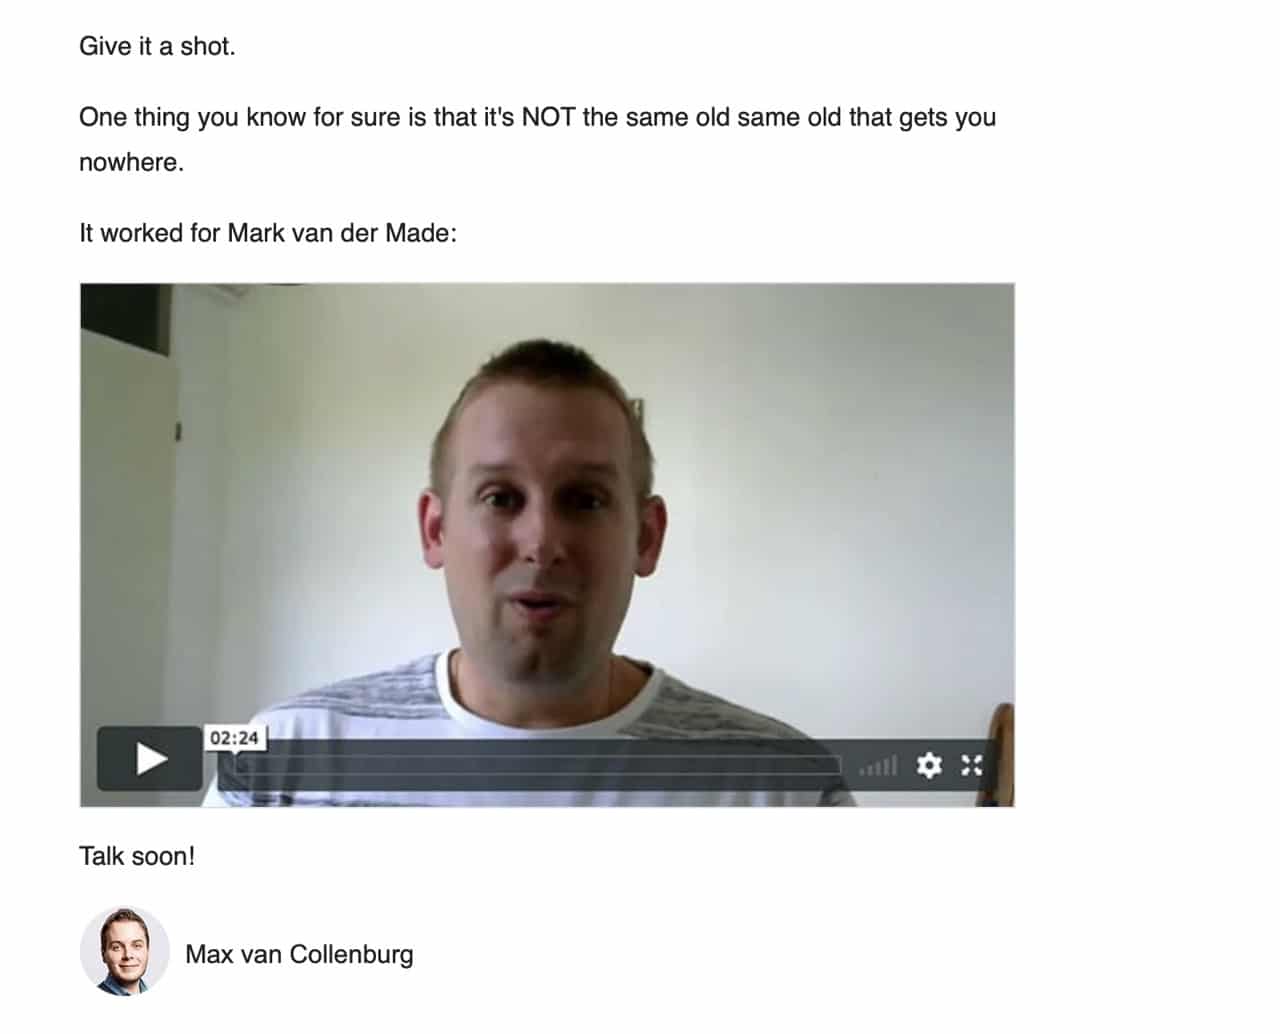 Example of a video testimonial in an email